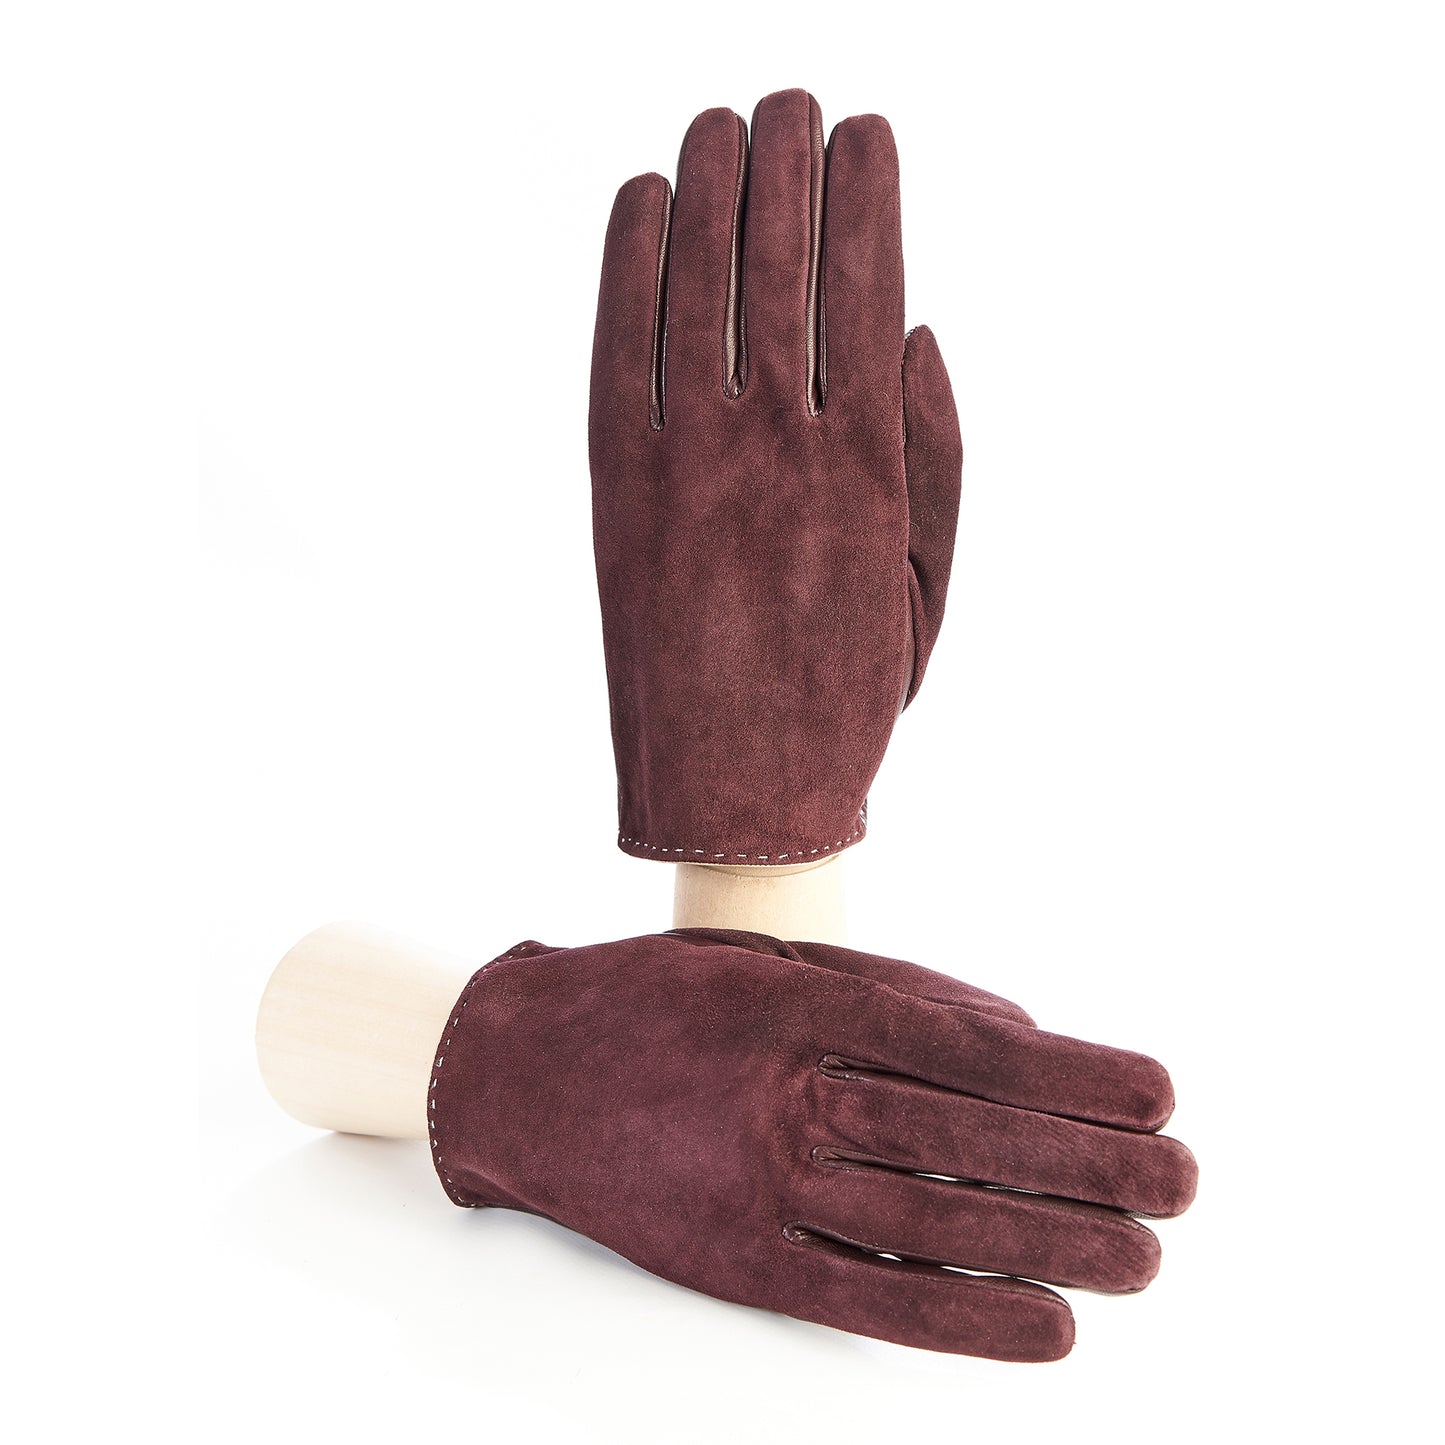 Men's elegant bordeaux suede and sheep leather combination gloves with hand-stitch details and silk lining